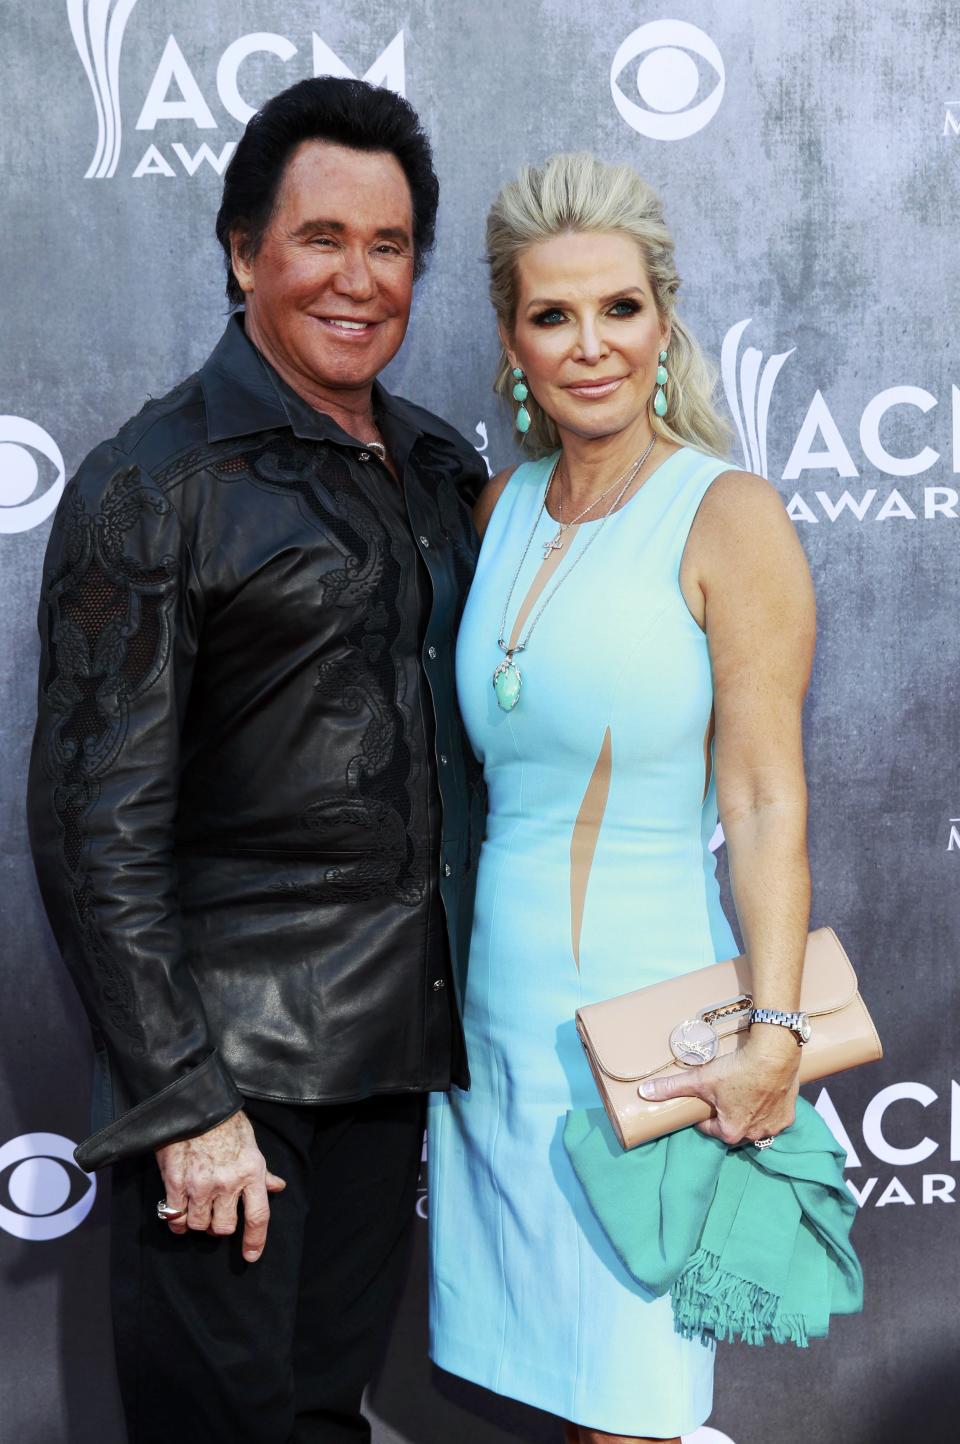 Singer Wayne Newton and his wife Kathleen McCrone arrive at the 49th Annual Academy of Country Music Awards in Las Vegas, Nevada April 6, 2014. REUTERS/Steve Marcus (UNITED STATES - Tags: ENTERTAINMENT)(ACMAWARDS-ARRIVALS)